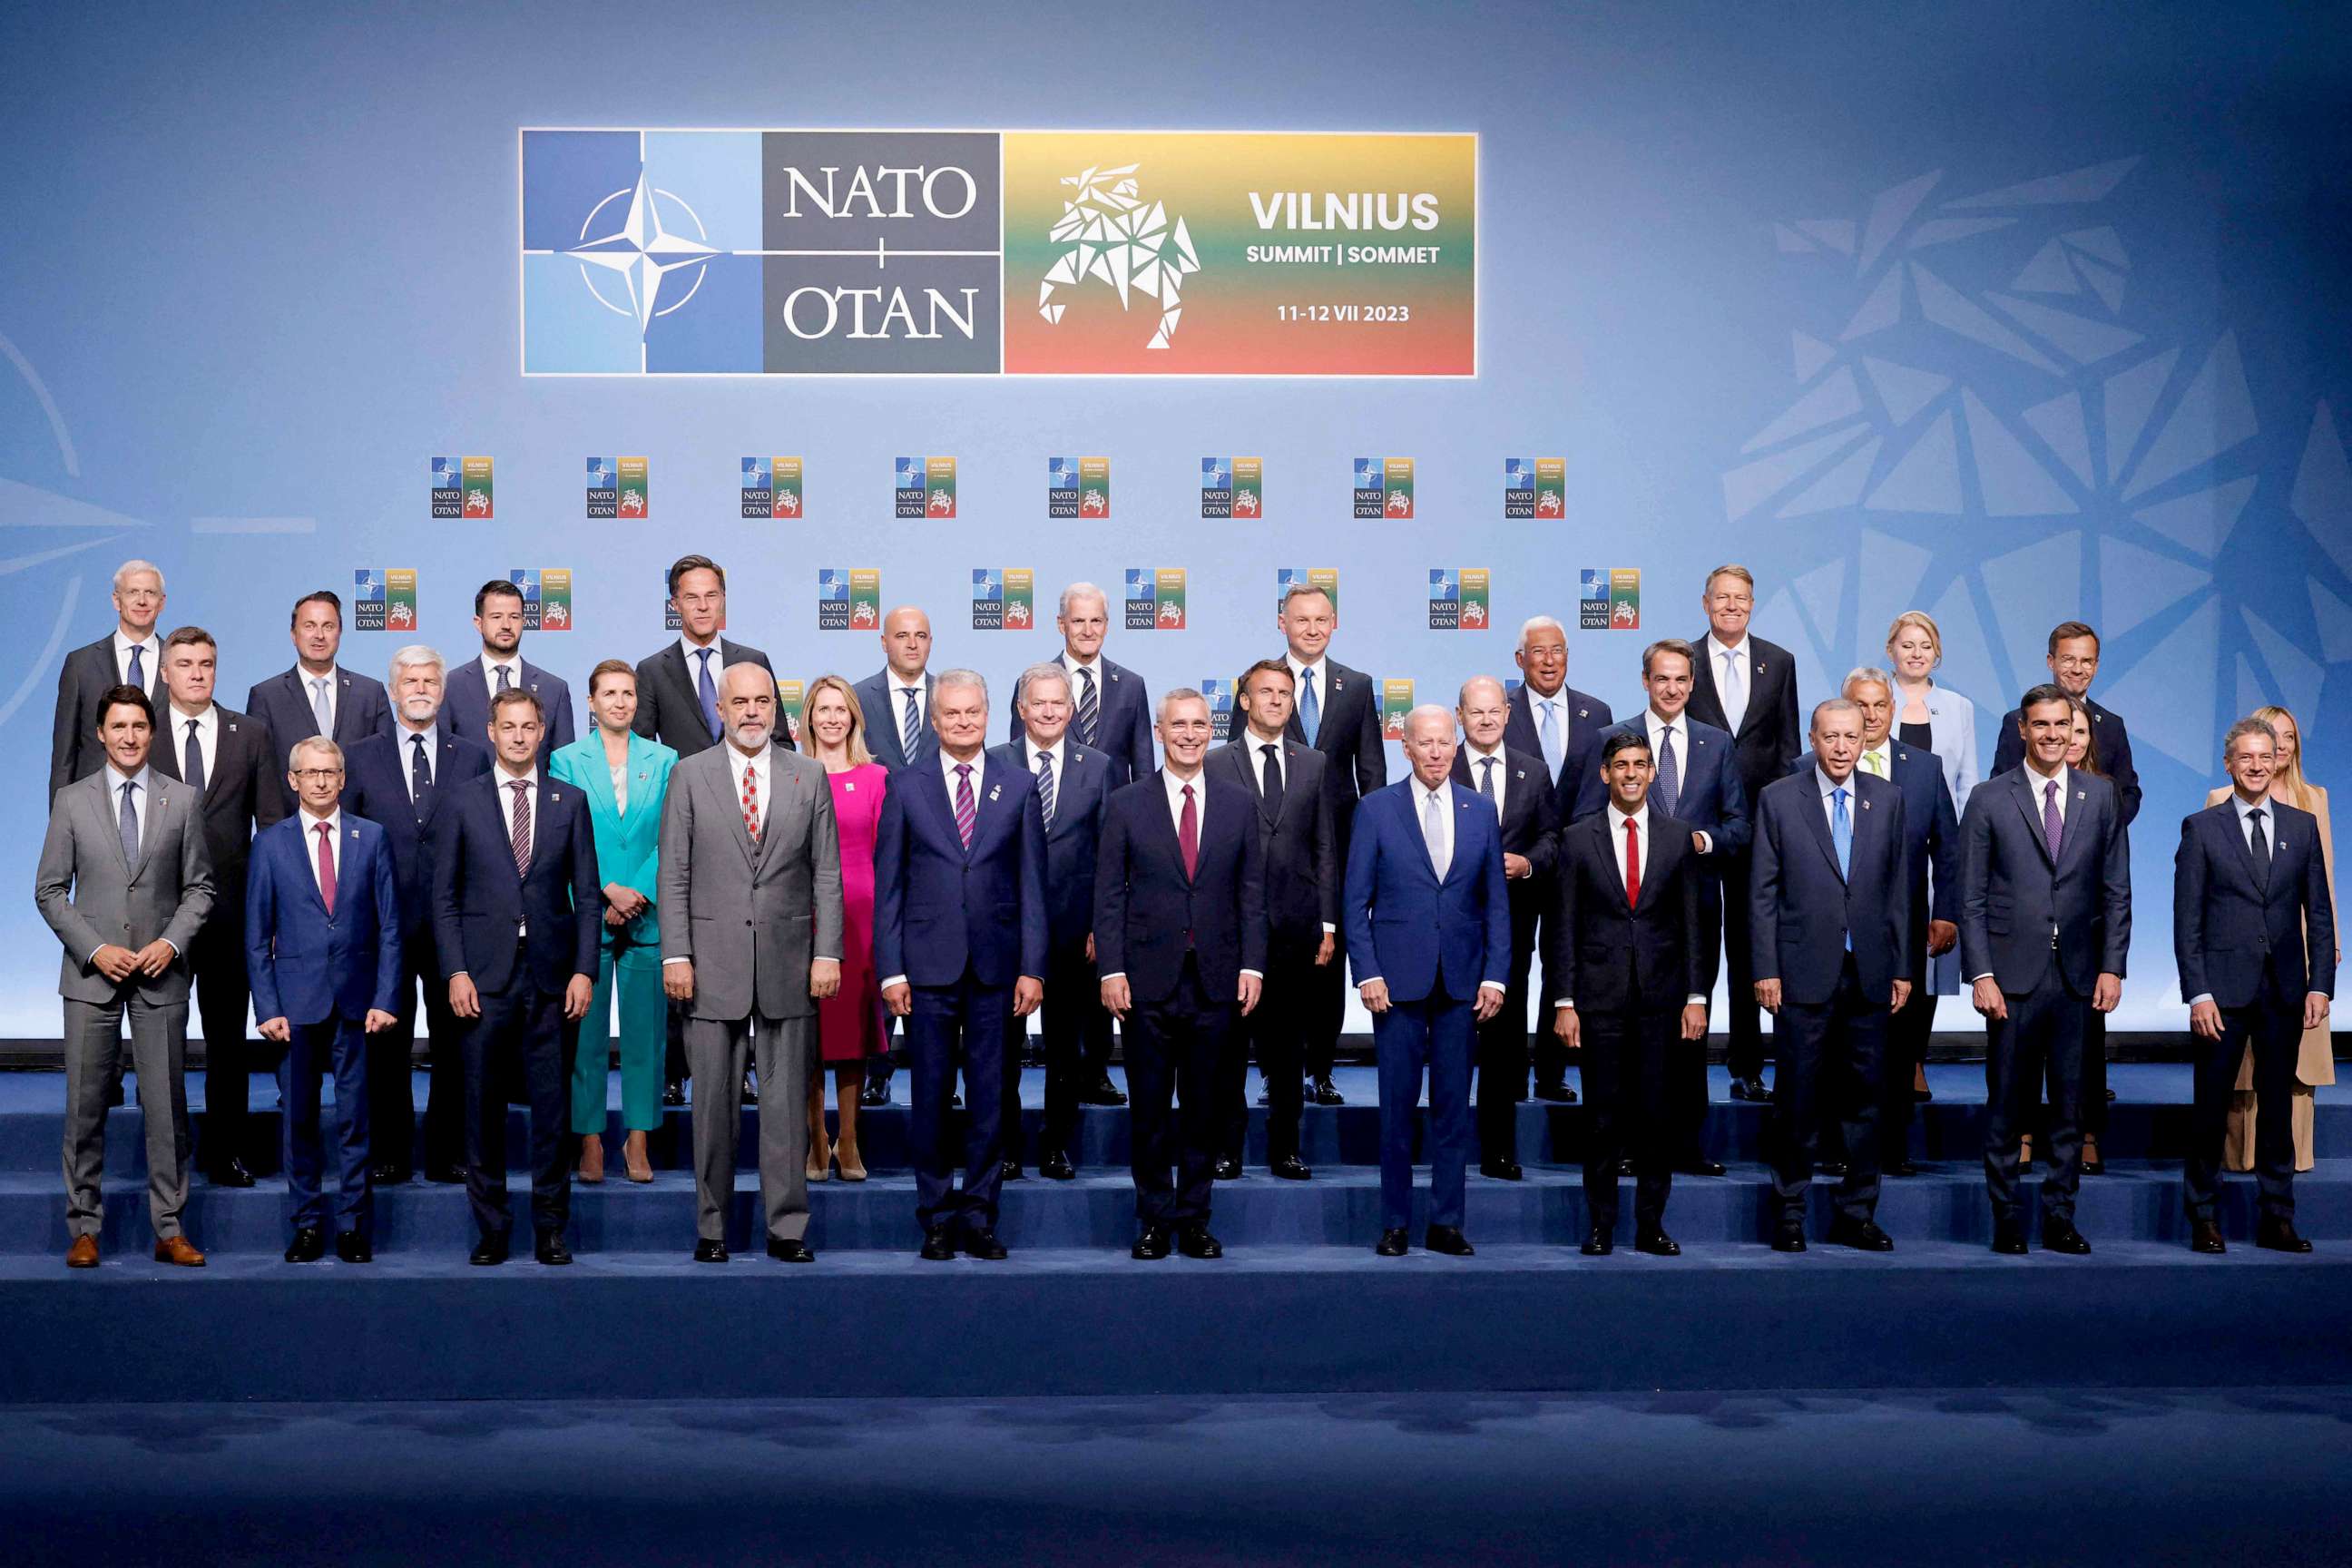 PHOTO: Lithuania's President Gitanas Nauseda (CL), NATO Secretary General Jens Stoltenberg (CR) and NATO Foreign Ministers pose for a family photograph during the NATO summit, in Vilnius on July 11, 2023.